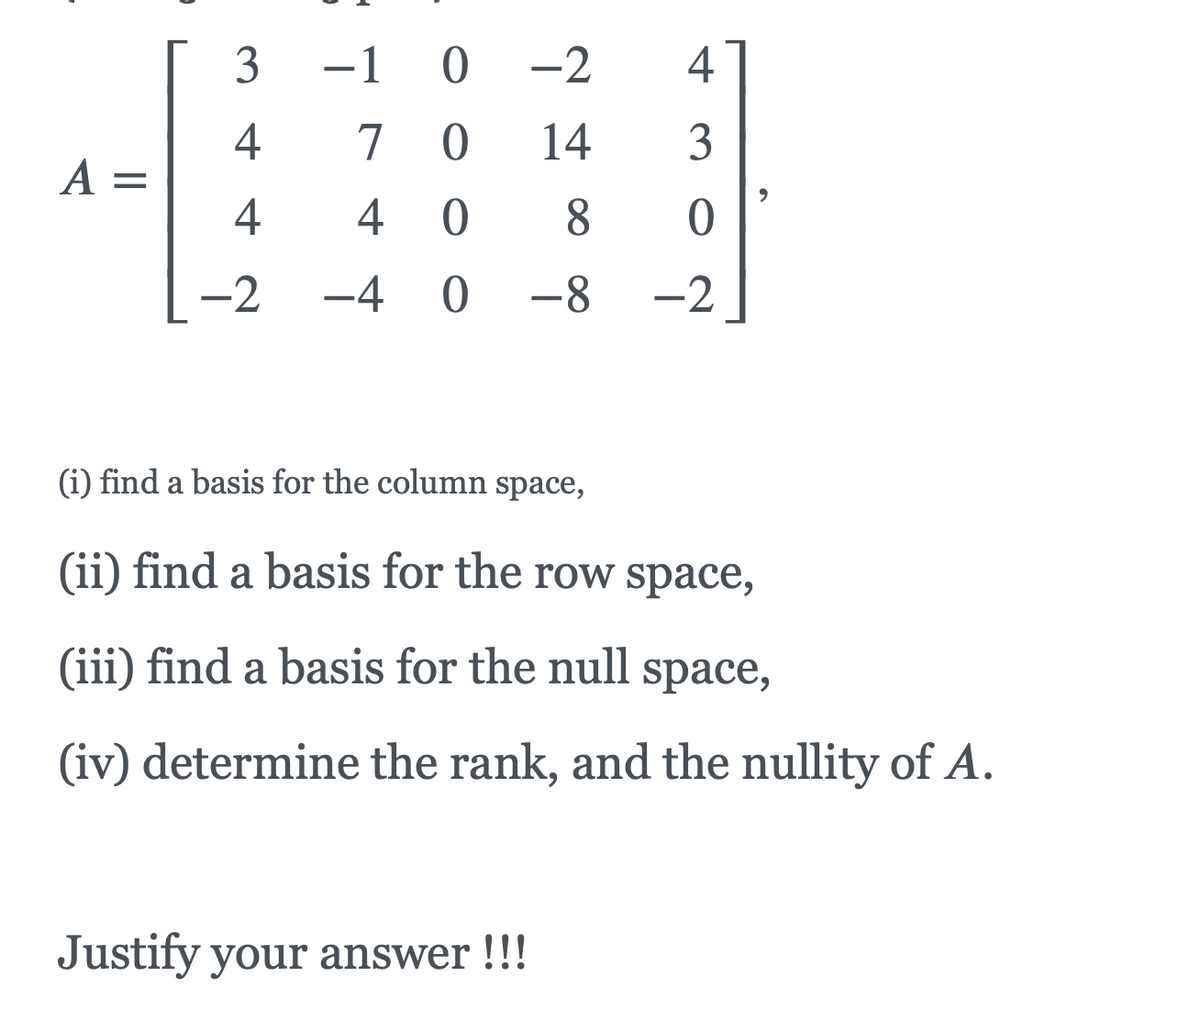 3
-1 0
-2
4
4
7
14
3
A =
4
4 0
8.
-2
-4 0
-8
-2
(i) find a basis for the column space,
(ii) find a basis for the row space,
(iii) find a basis for the null space,
(iv) determine the rank, and the nullity of A.
Justify your answer !!!
